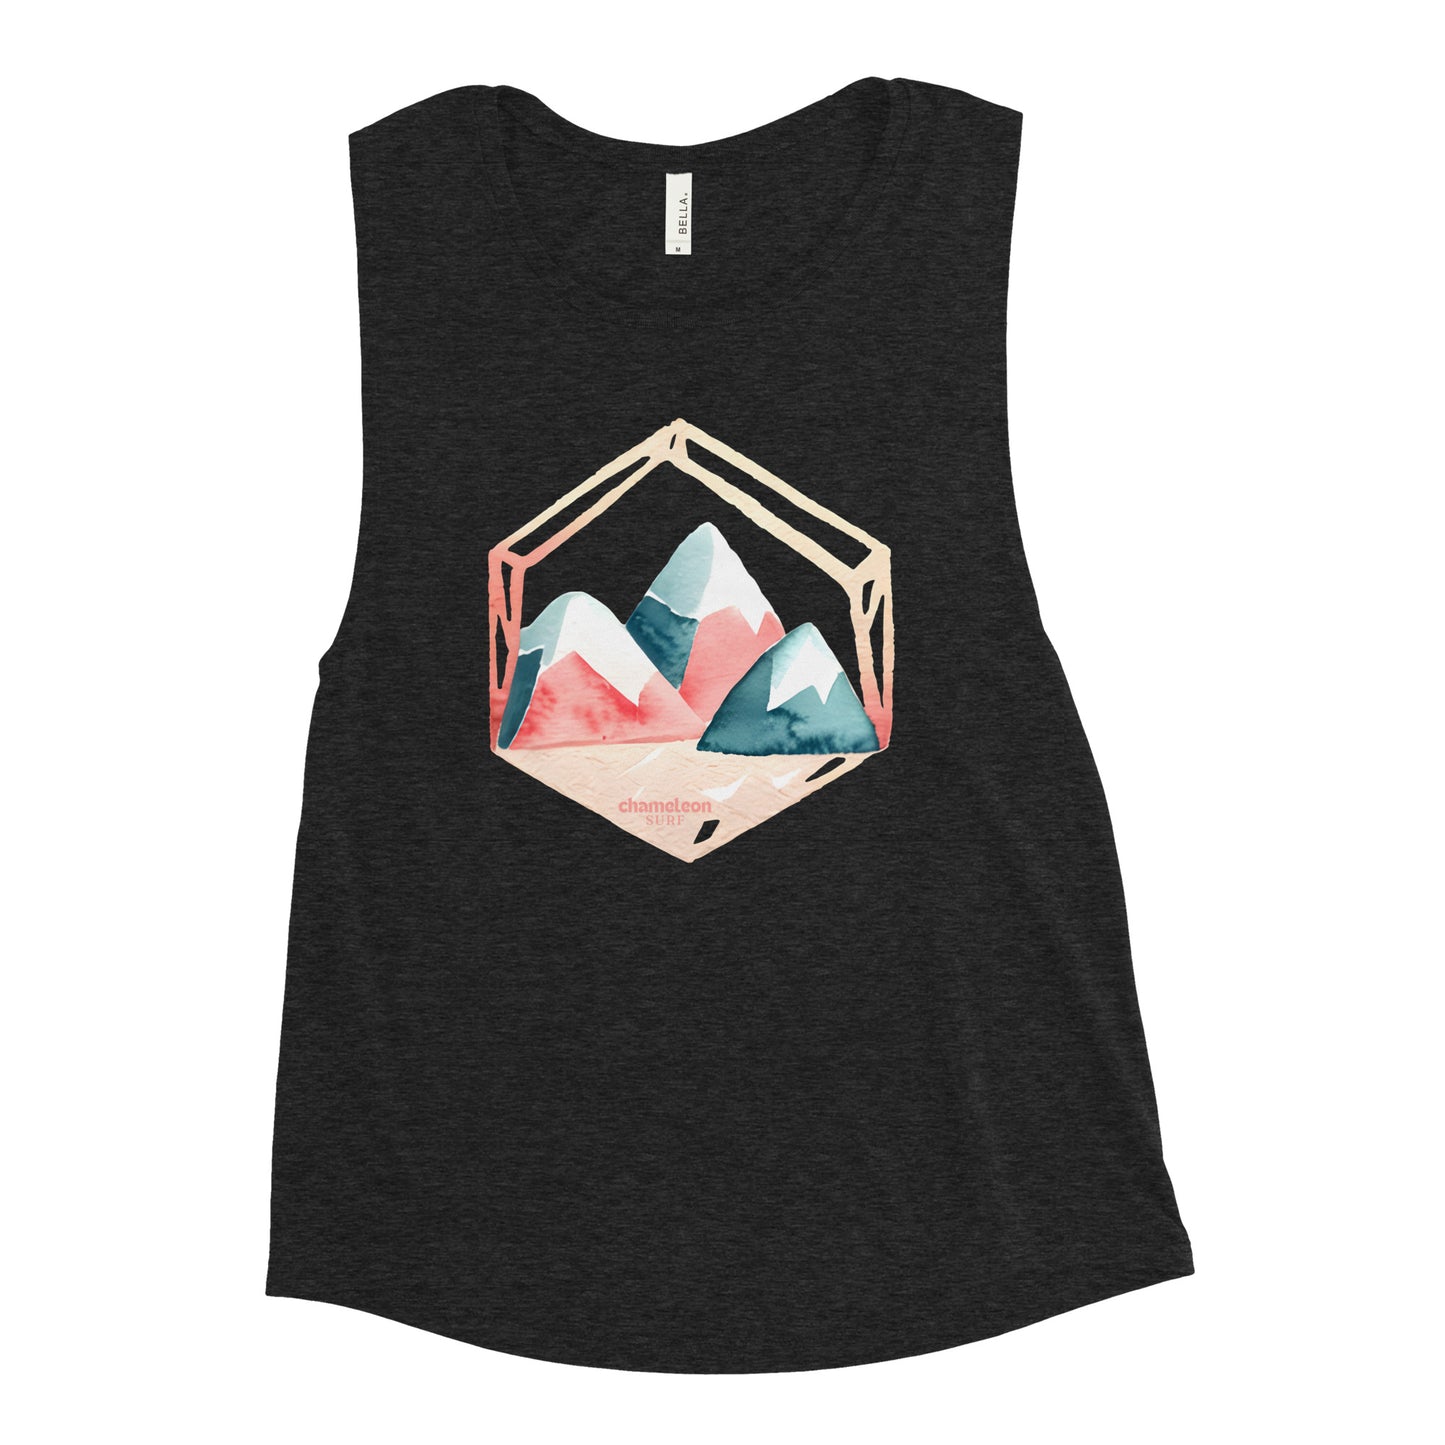 Pink Blue Snow Topped Women's Muscle Tank Top